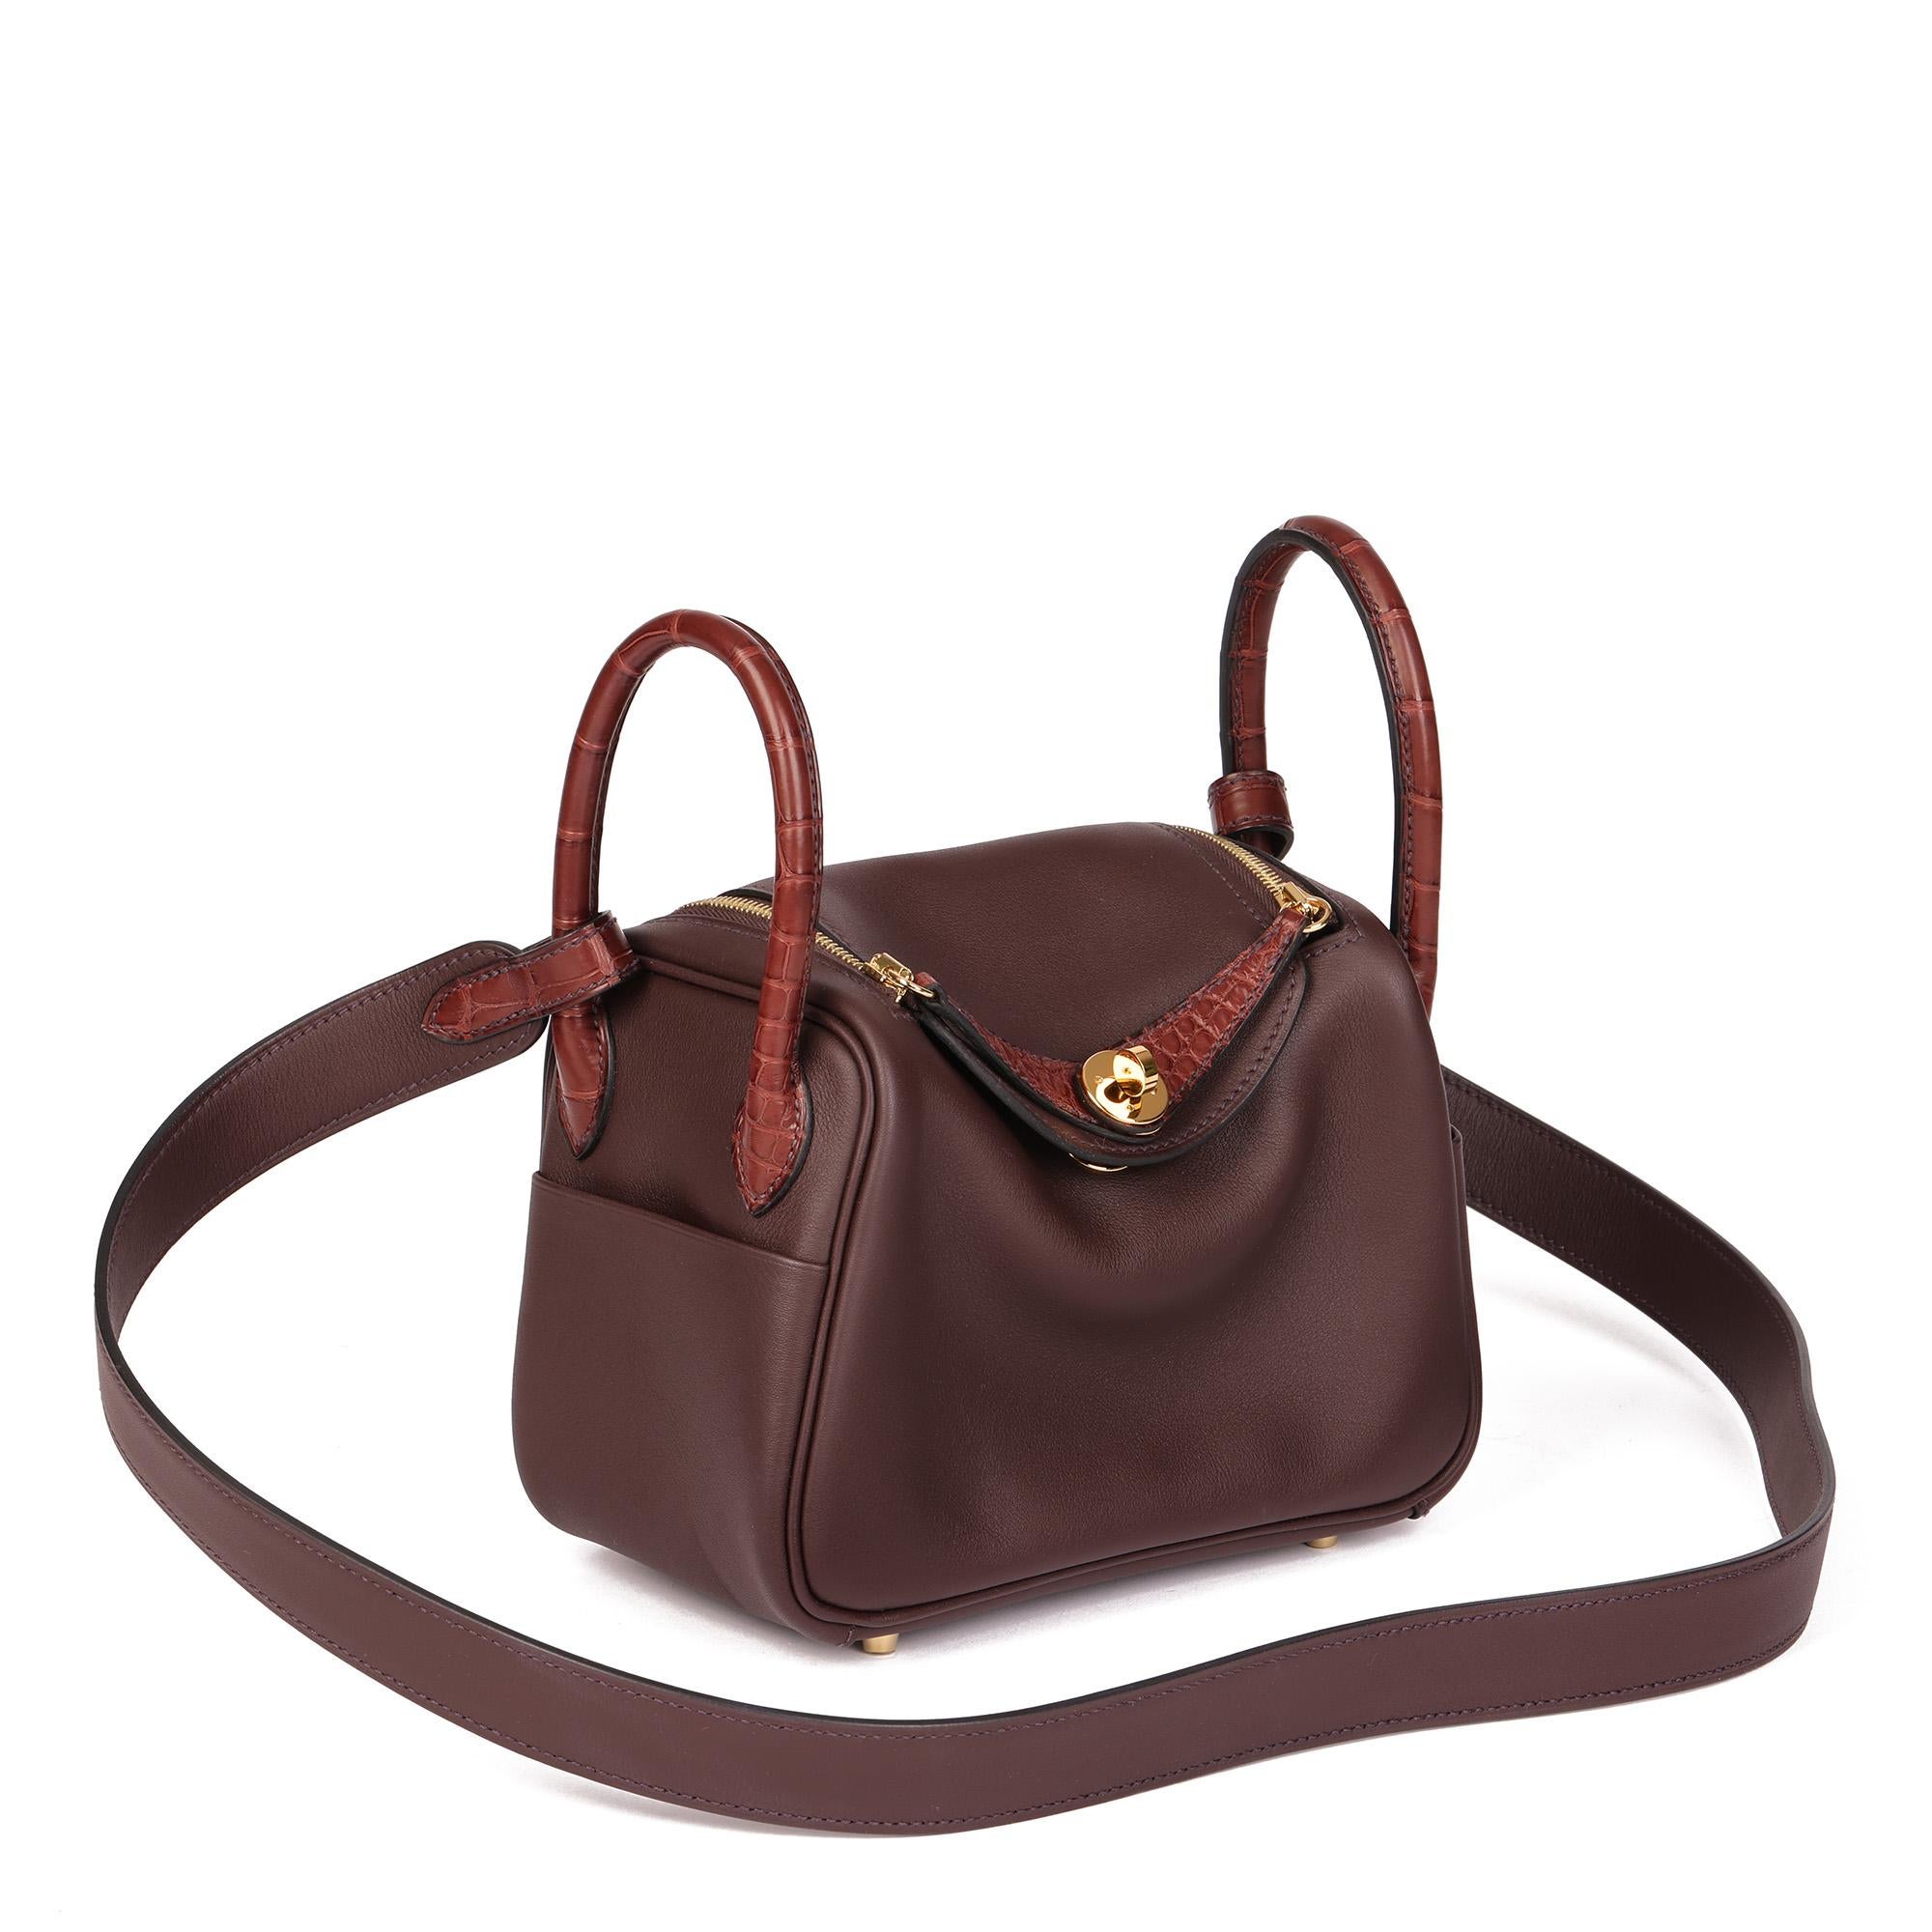 HERMÈS
Rouge Sellier Veau Swift Leather & Matte Mississippiensis Alligator Leather Mini Lindy Touch

Xupes Reference: CB712
Serial Number: Z
Age (Circa): 2021
Accompanied By: Hermès Dust Bag, Box, Harrods Receipt, Care Booklet, Rain Cover,